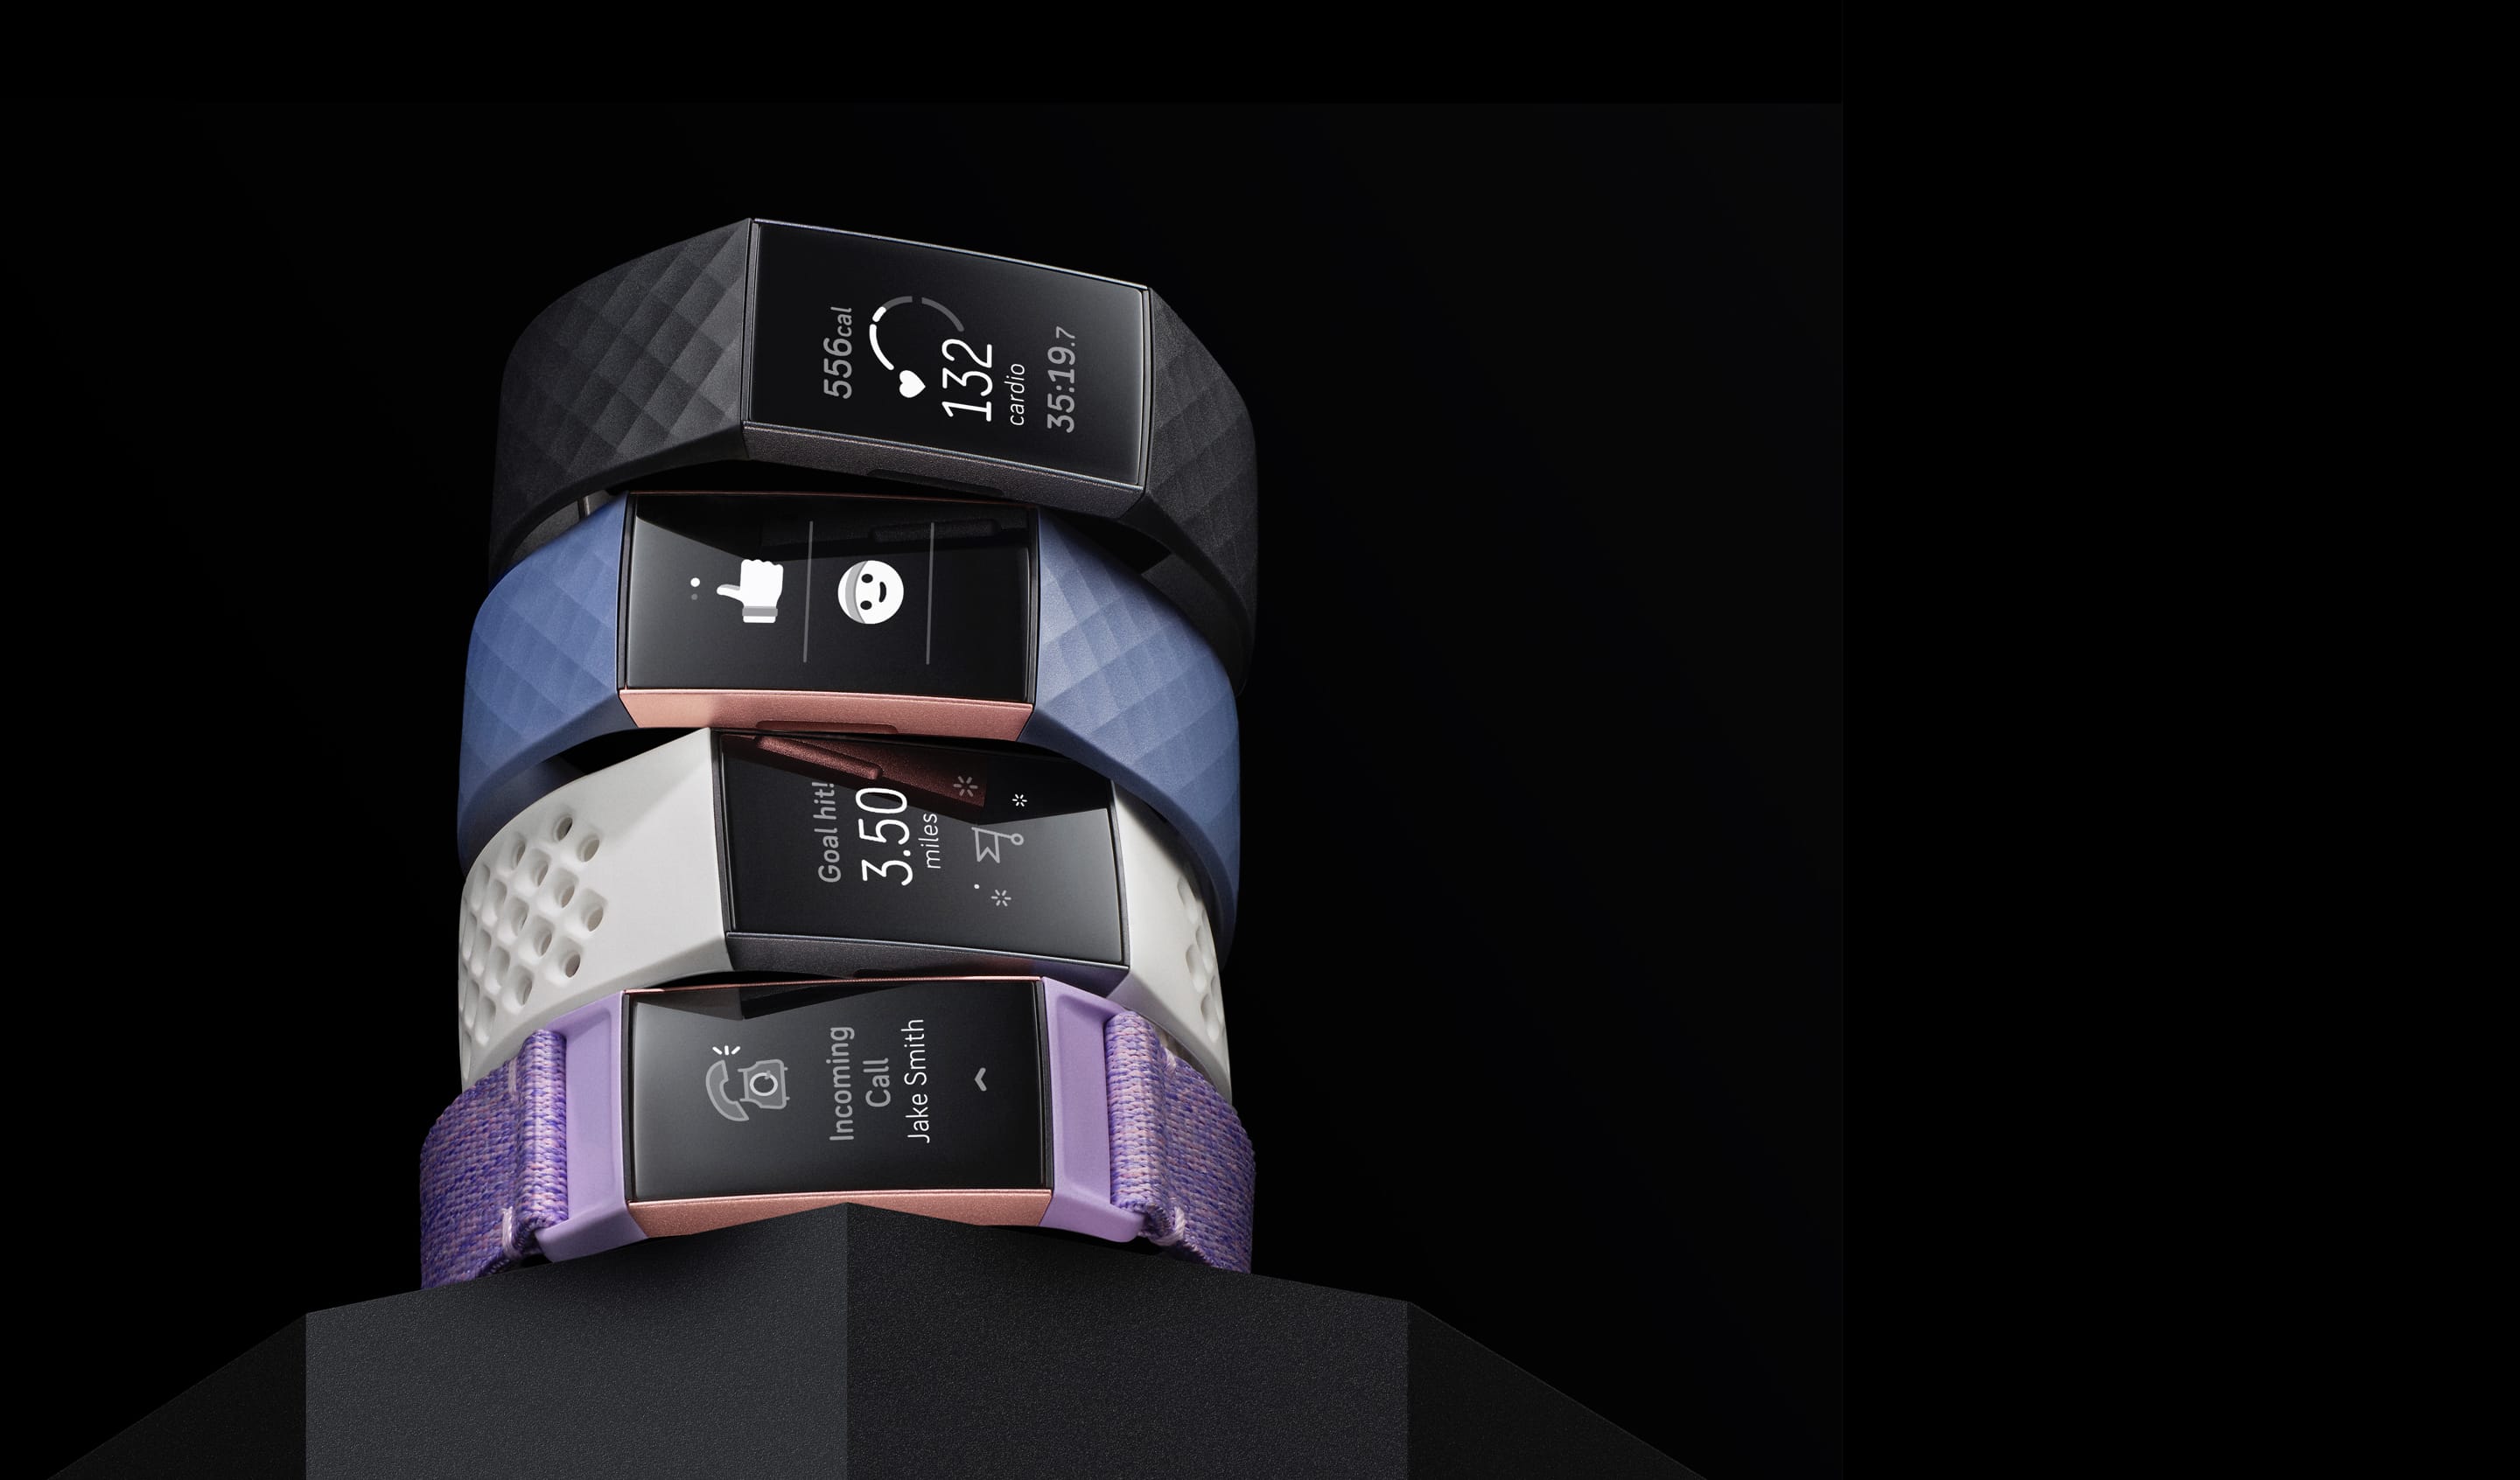 fitbit charge 3 berry band